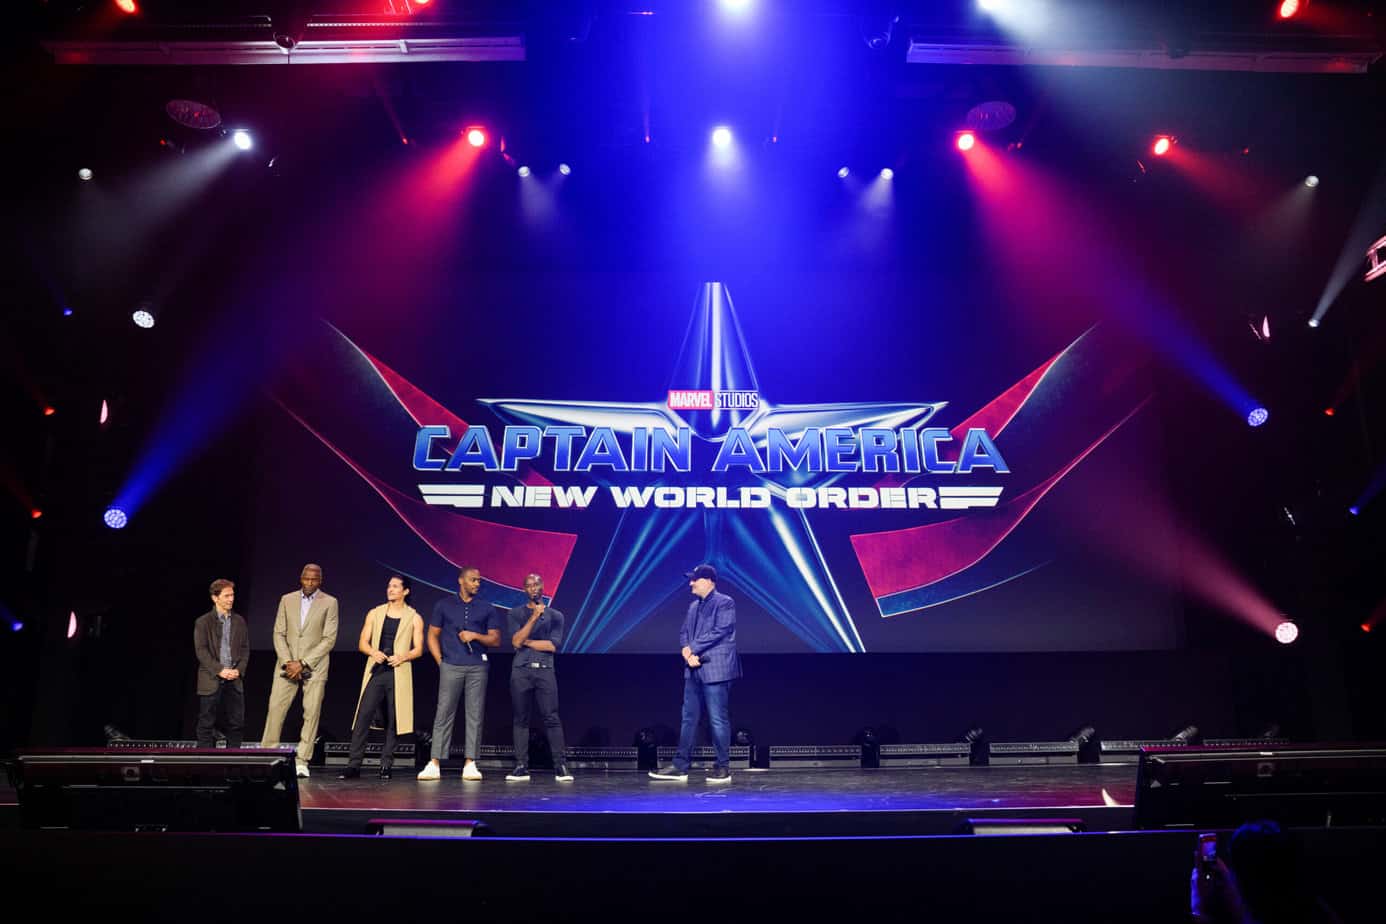 The cast of Captain America New World Order on stage during the Marvel Studios panel at D23 Expo 2022 with the film's logo behind them.